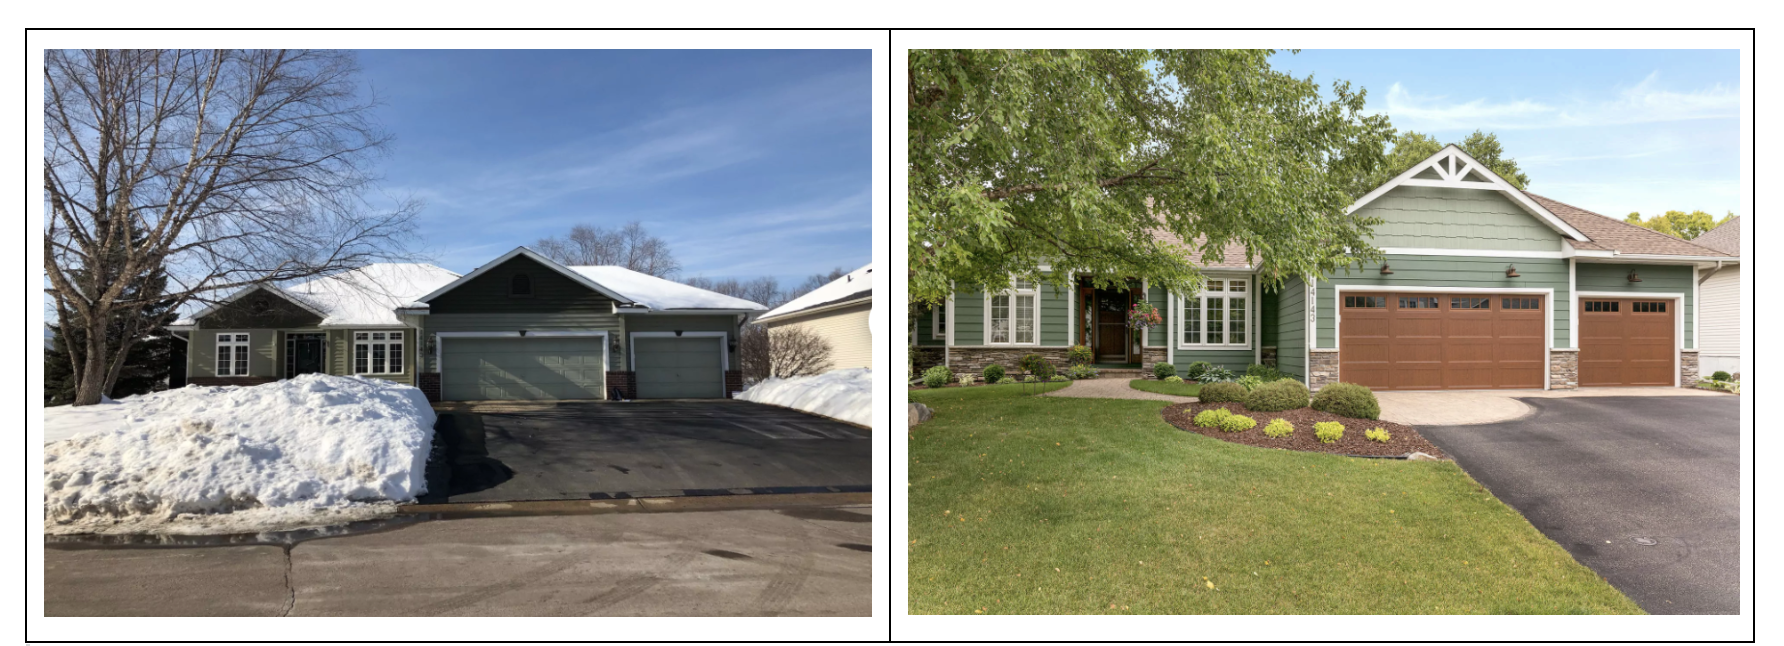 Before and after curb appeal images. 